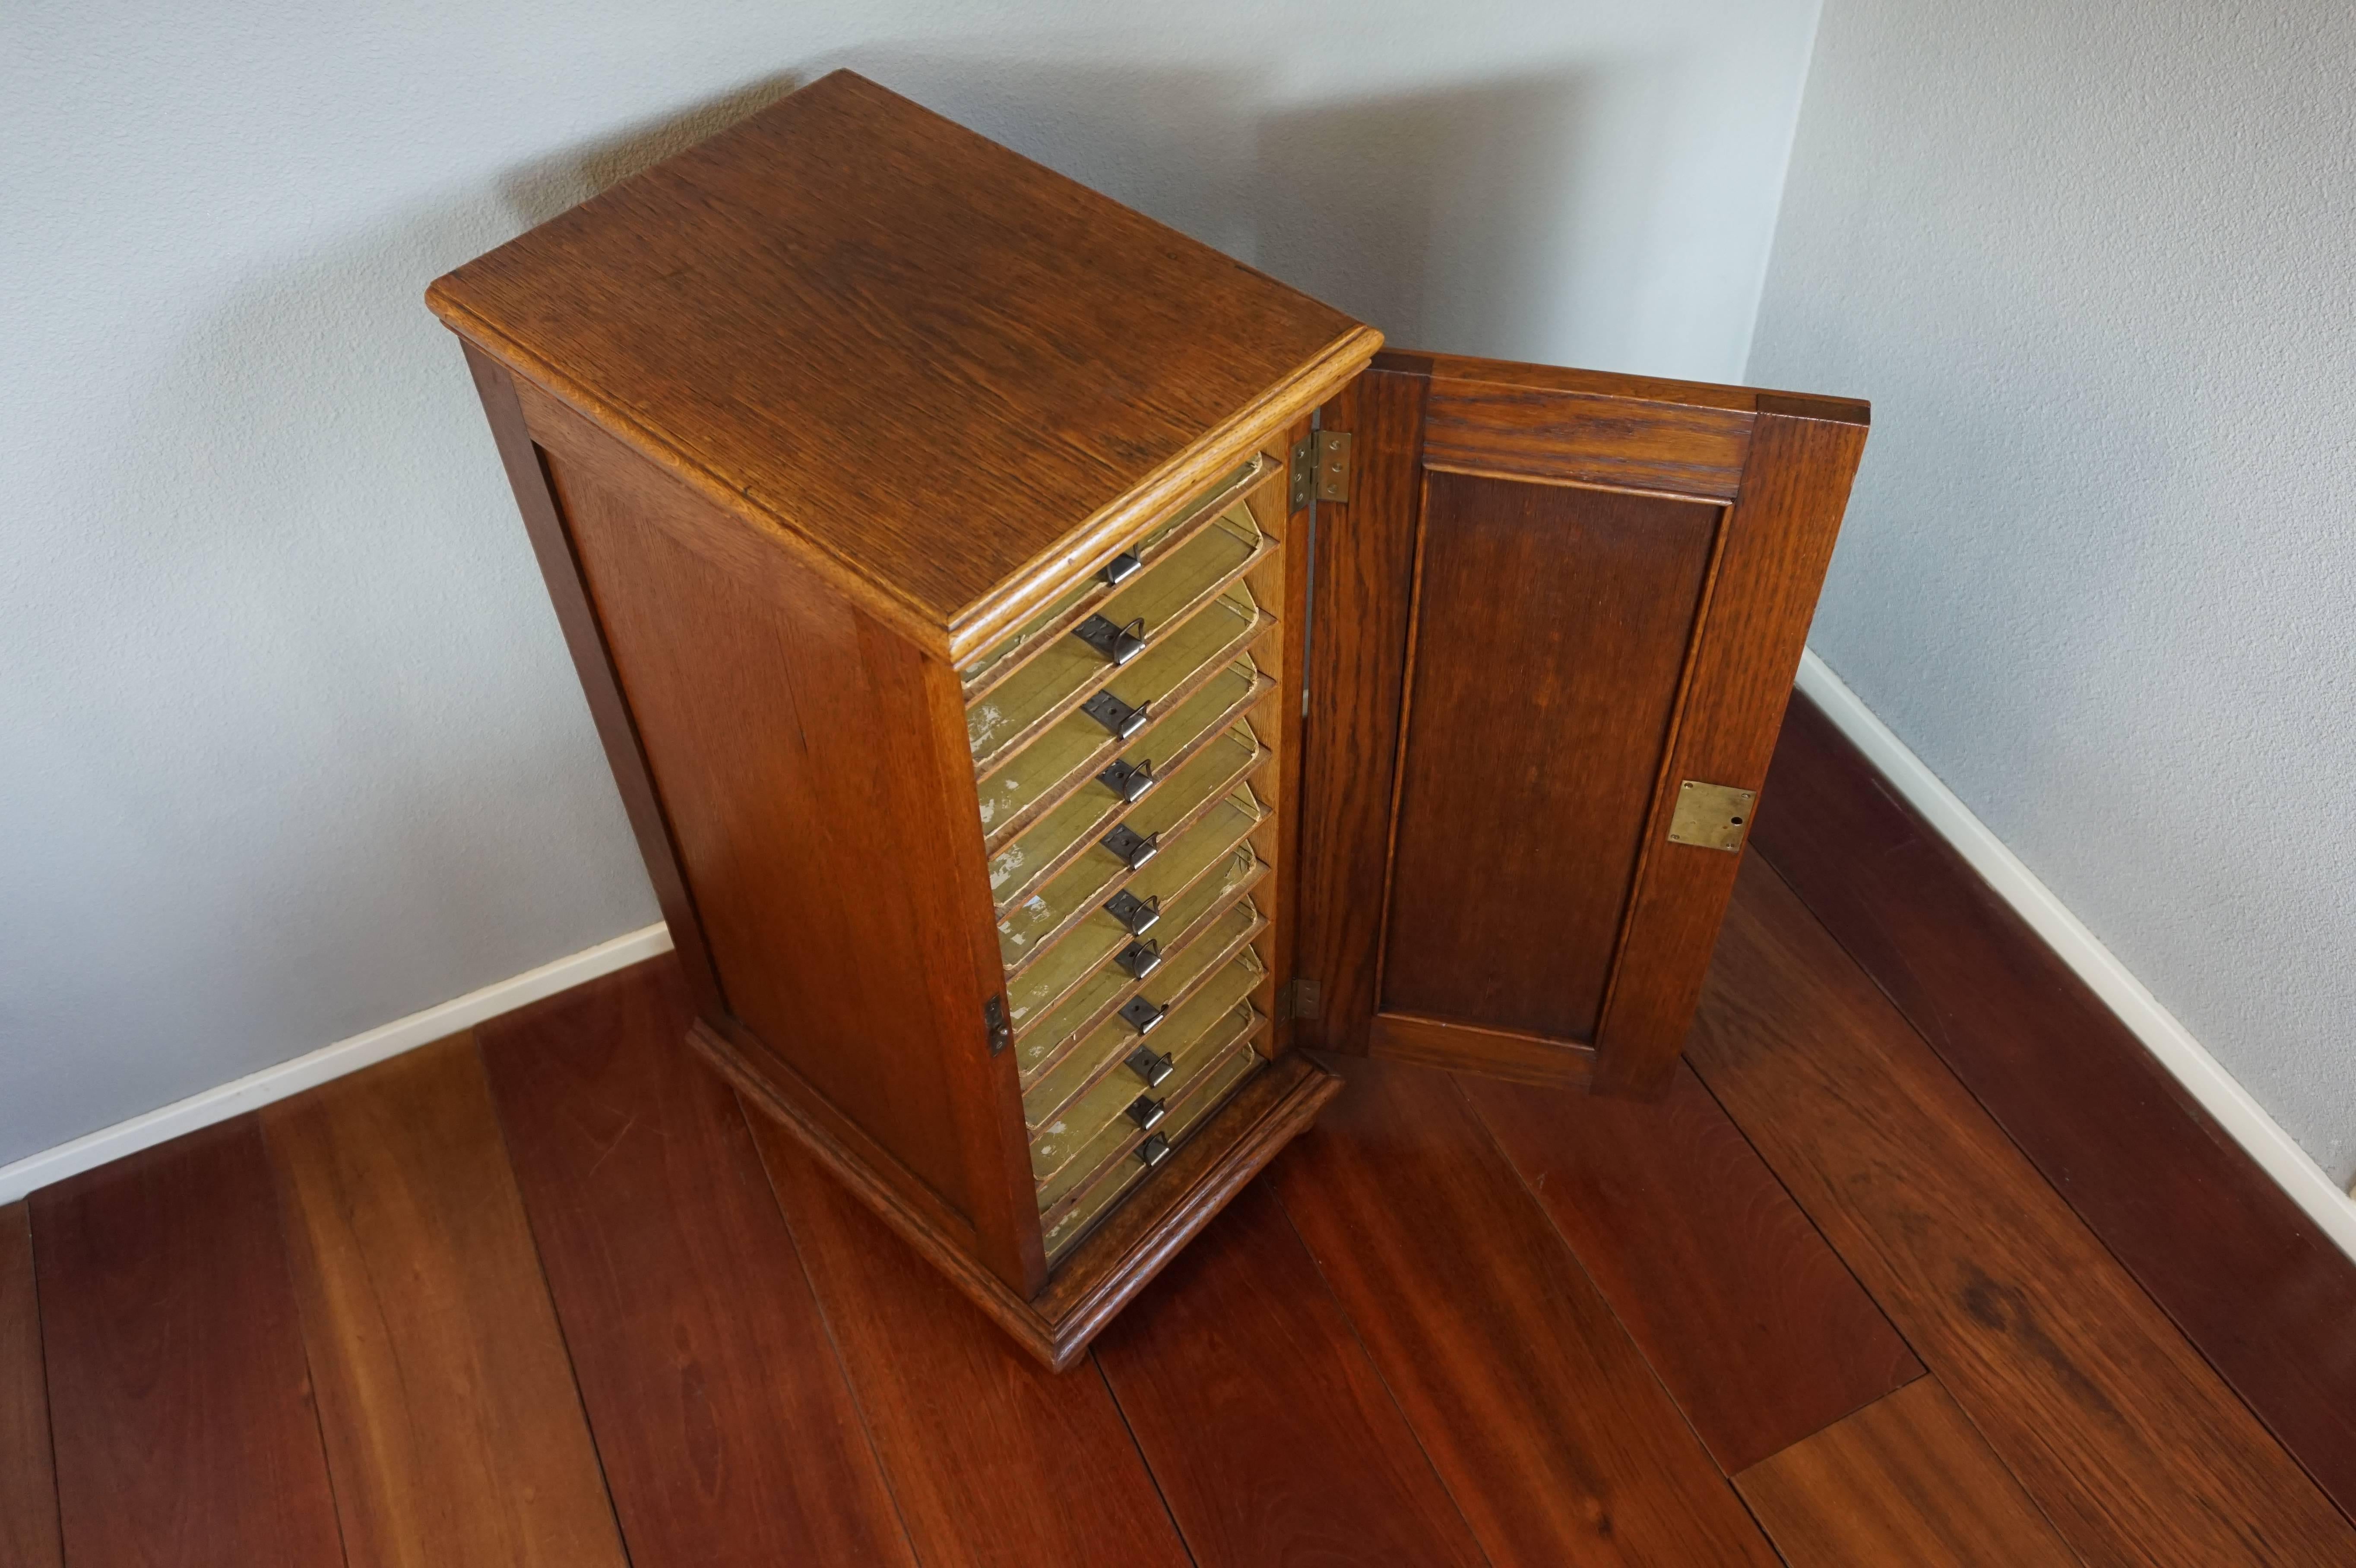 Stunning little handcrafted filing cabinet with lock and key.

This timeless design, handcrafted, all original and very practical filing cabinet was used by the former owner for keeping music paper. We have never seen such a handy and practical